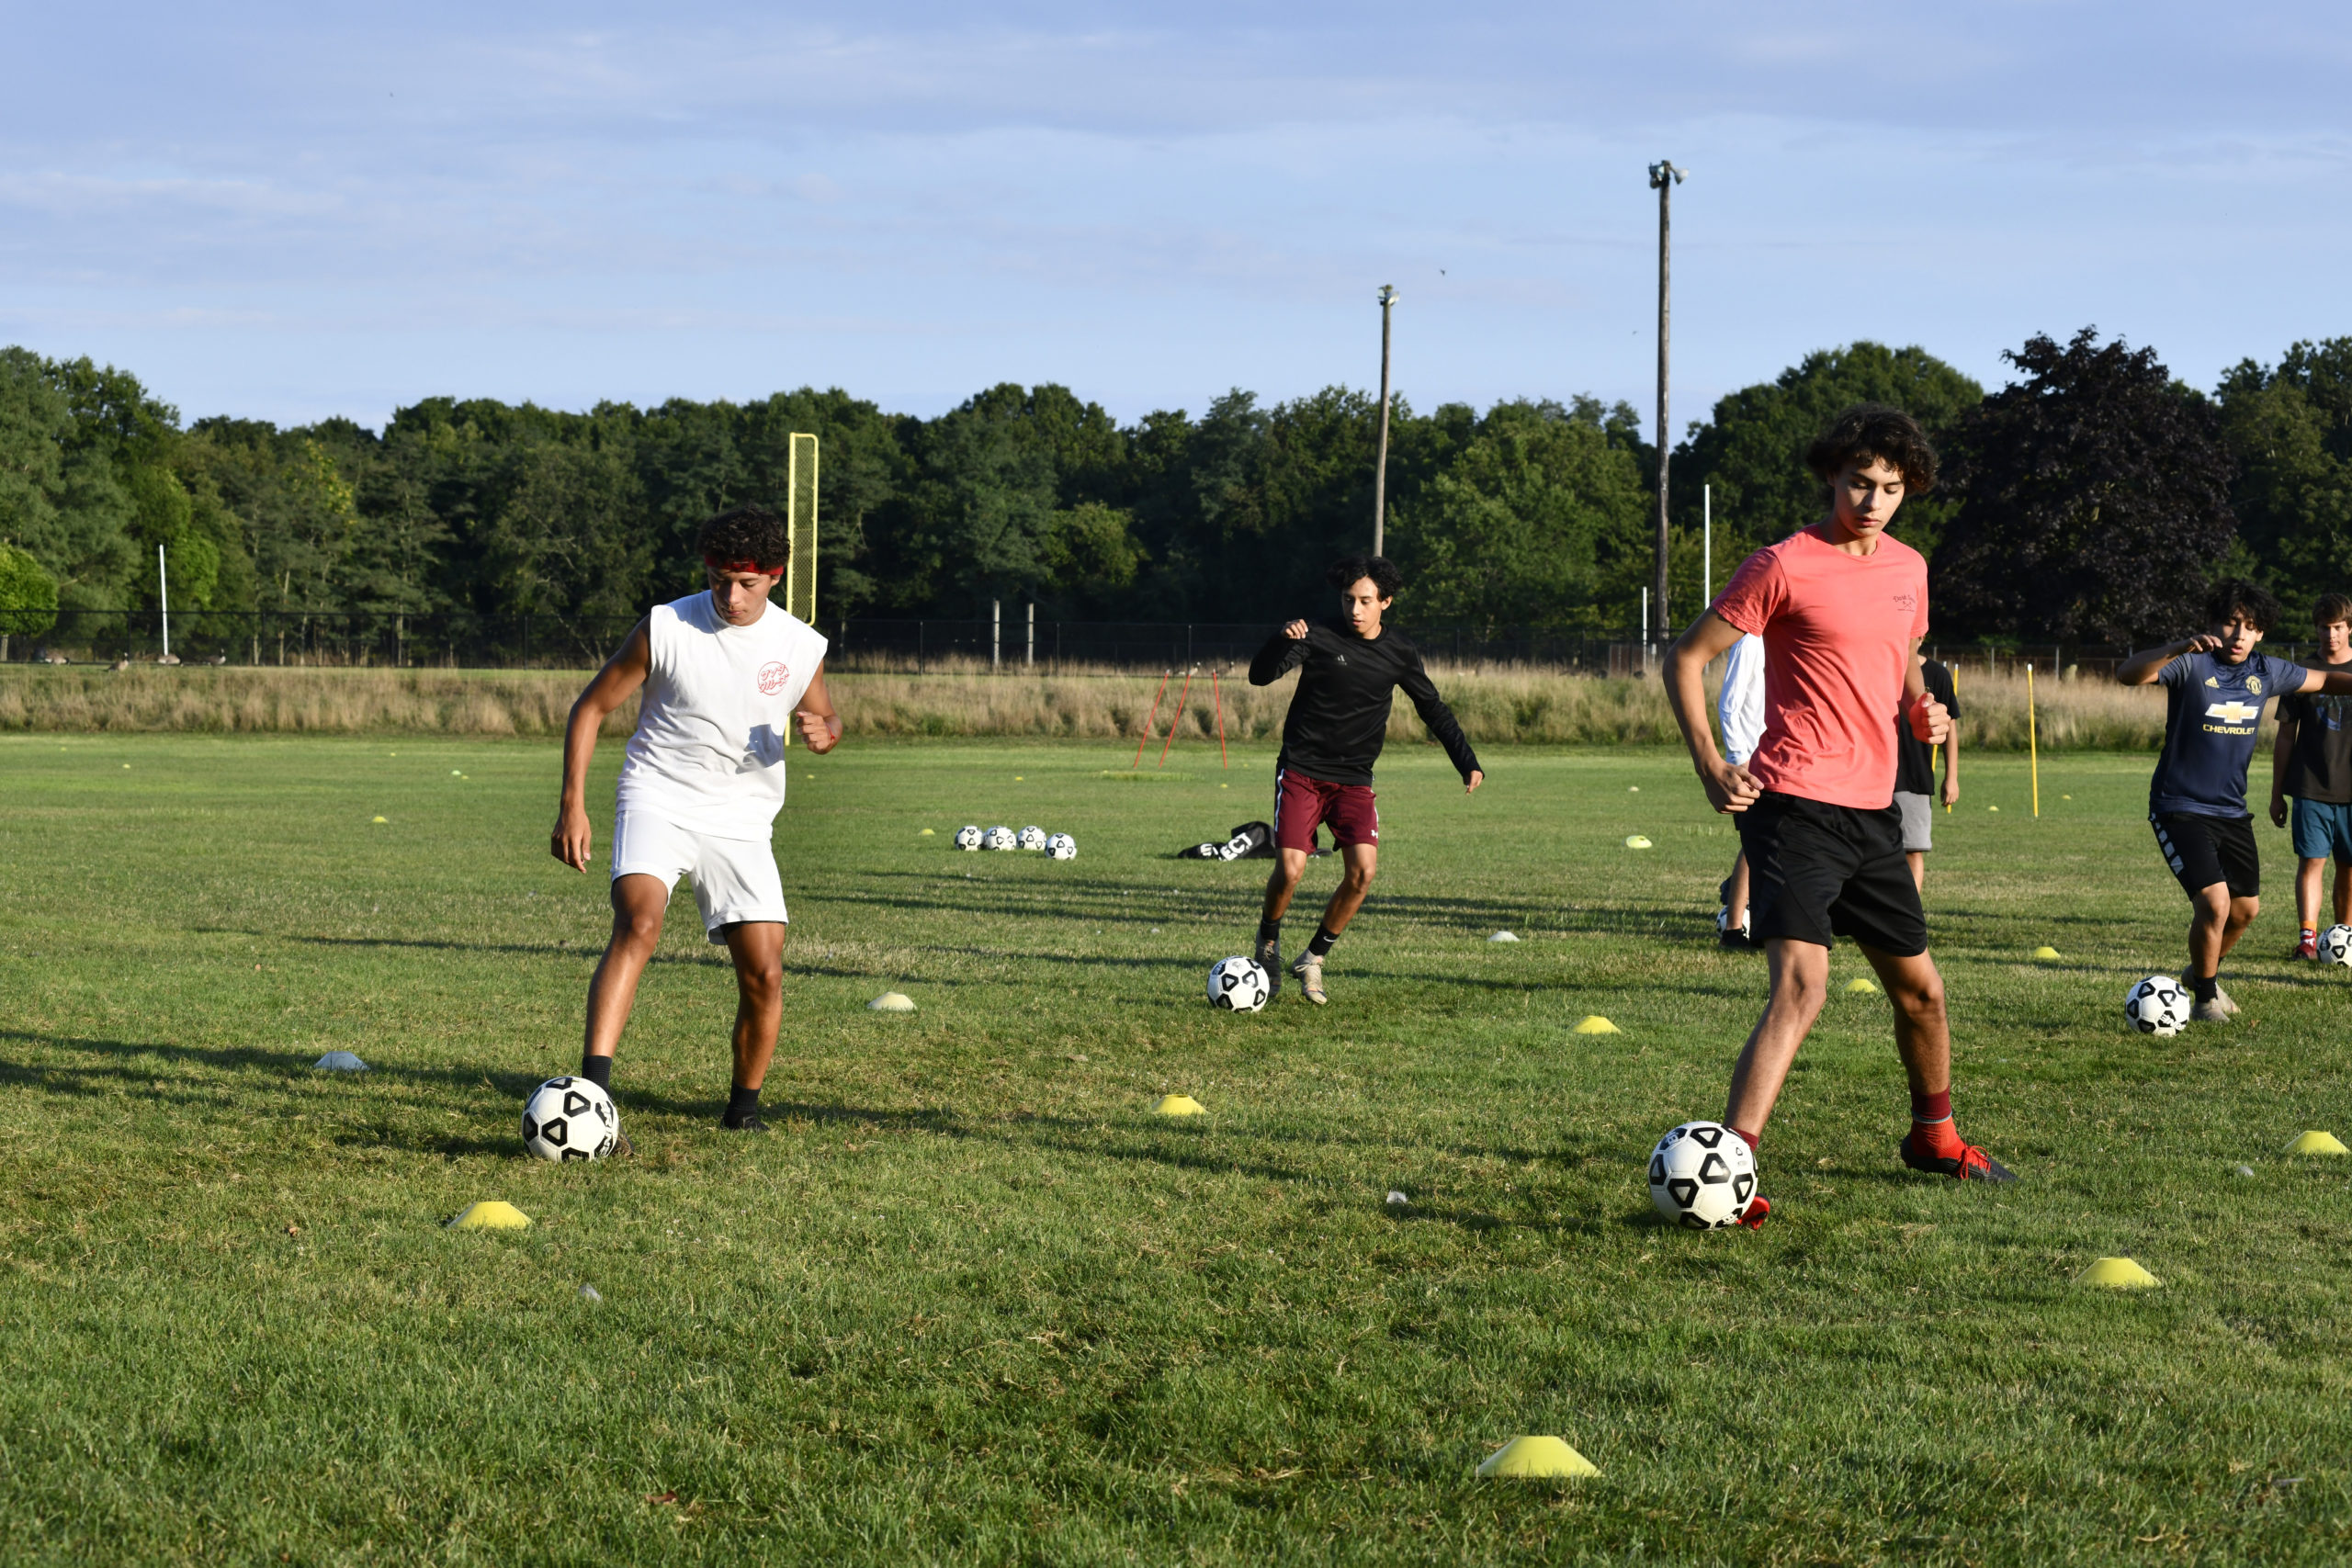 Players practice at Mashashimuet Park in Sag Harbor on Wednesday, August 19.  DANA SHAW